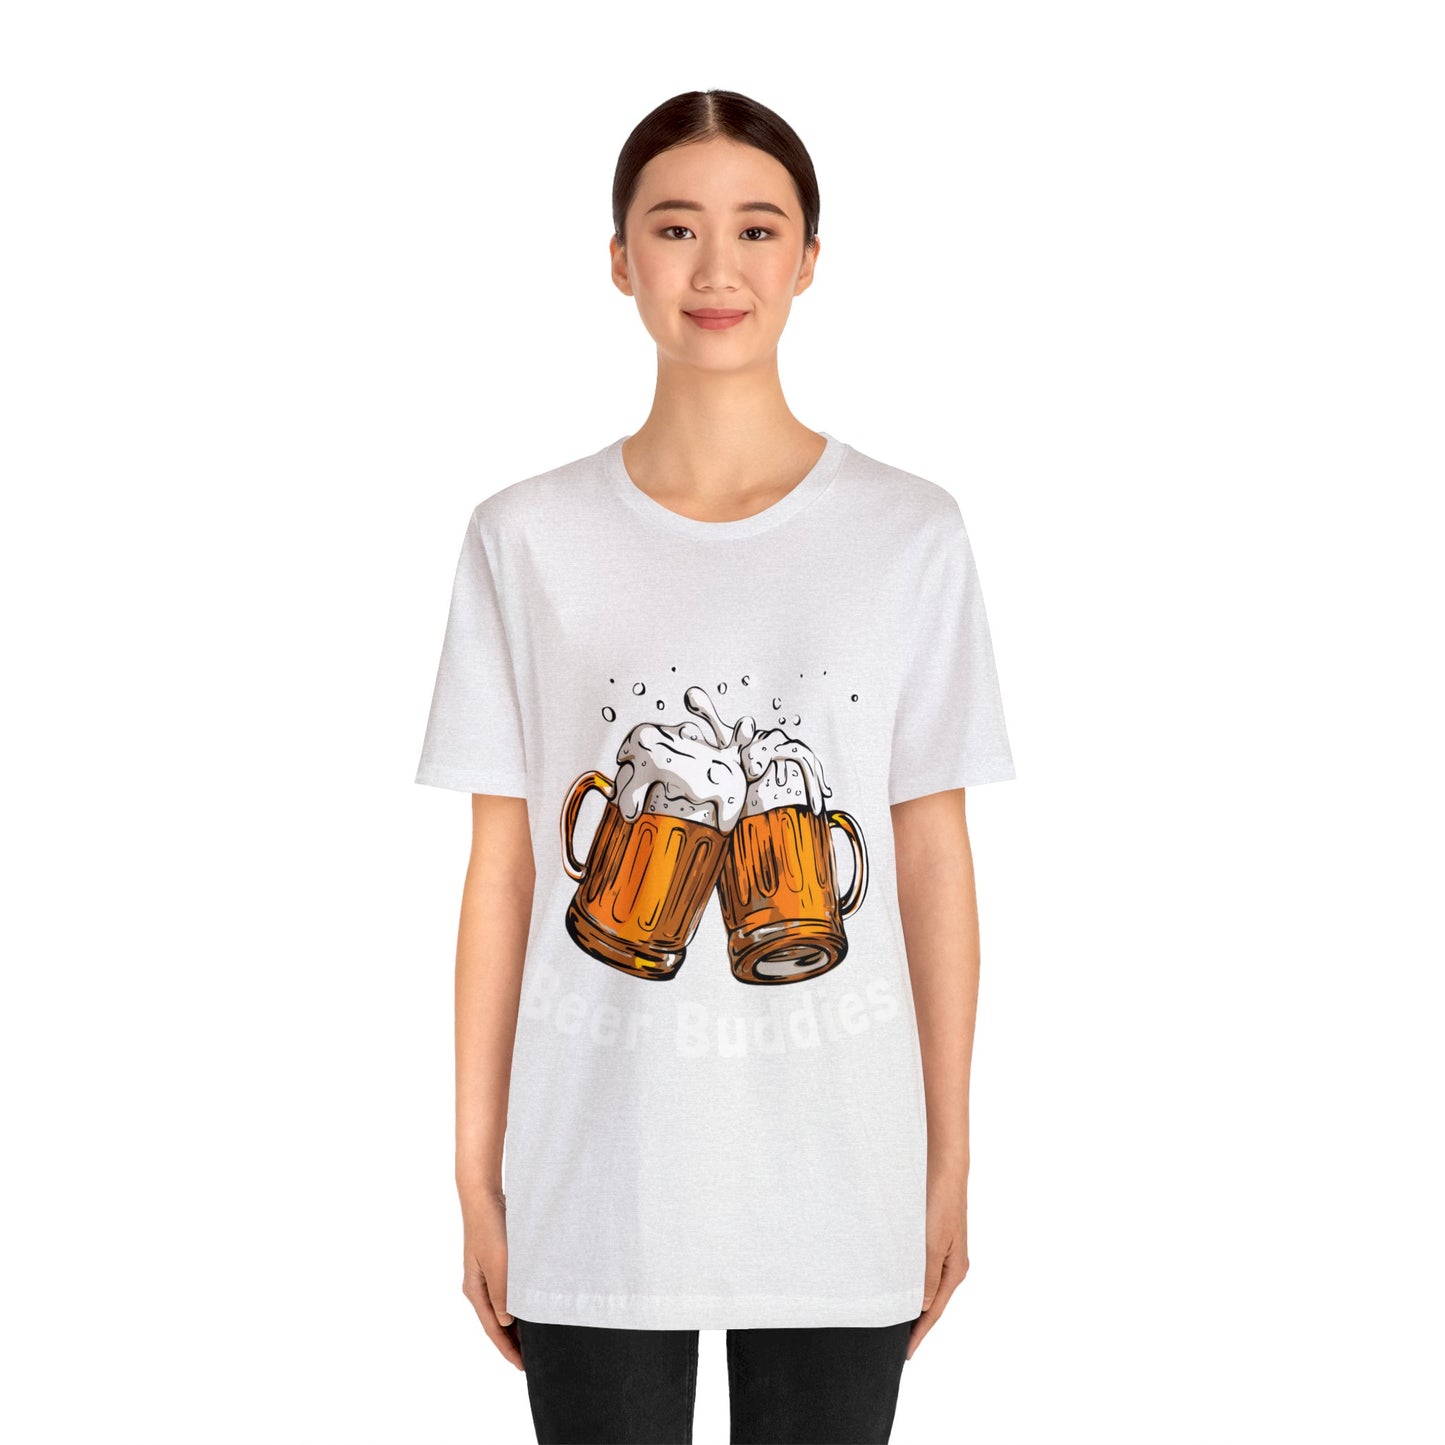 Beer Buddies- Drinking Graphic T Shirt for Men